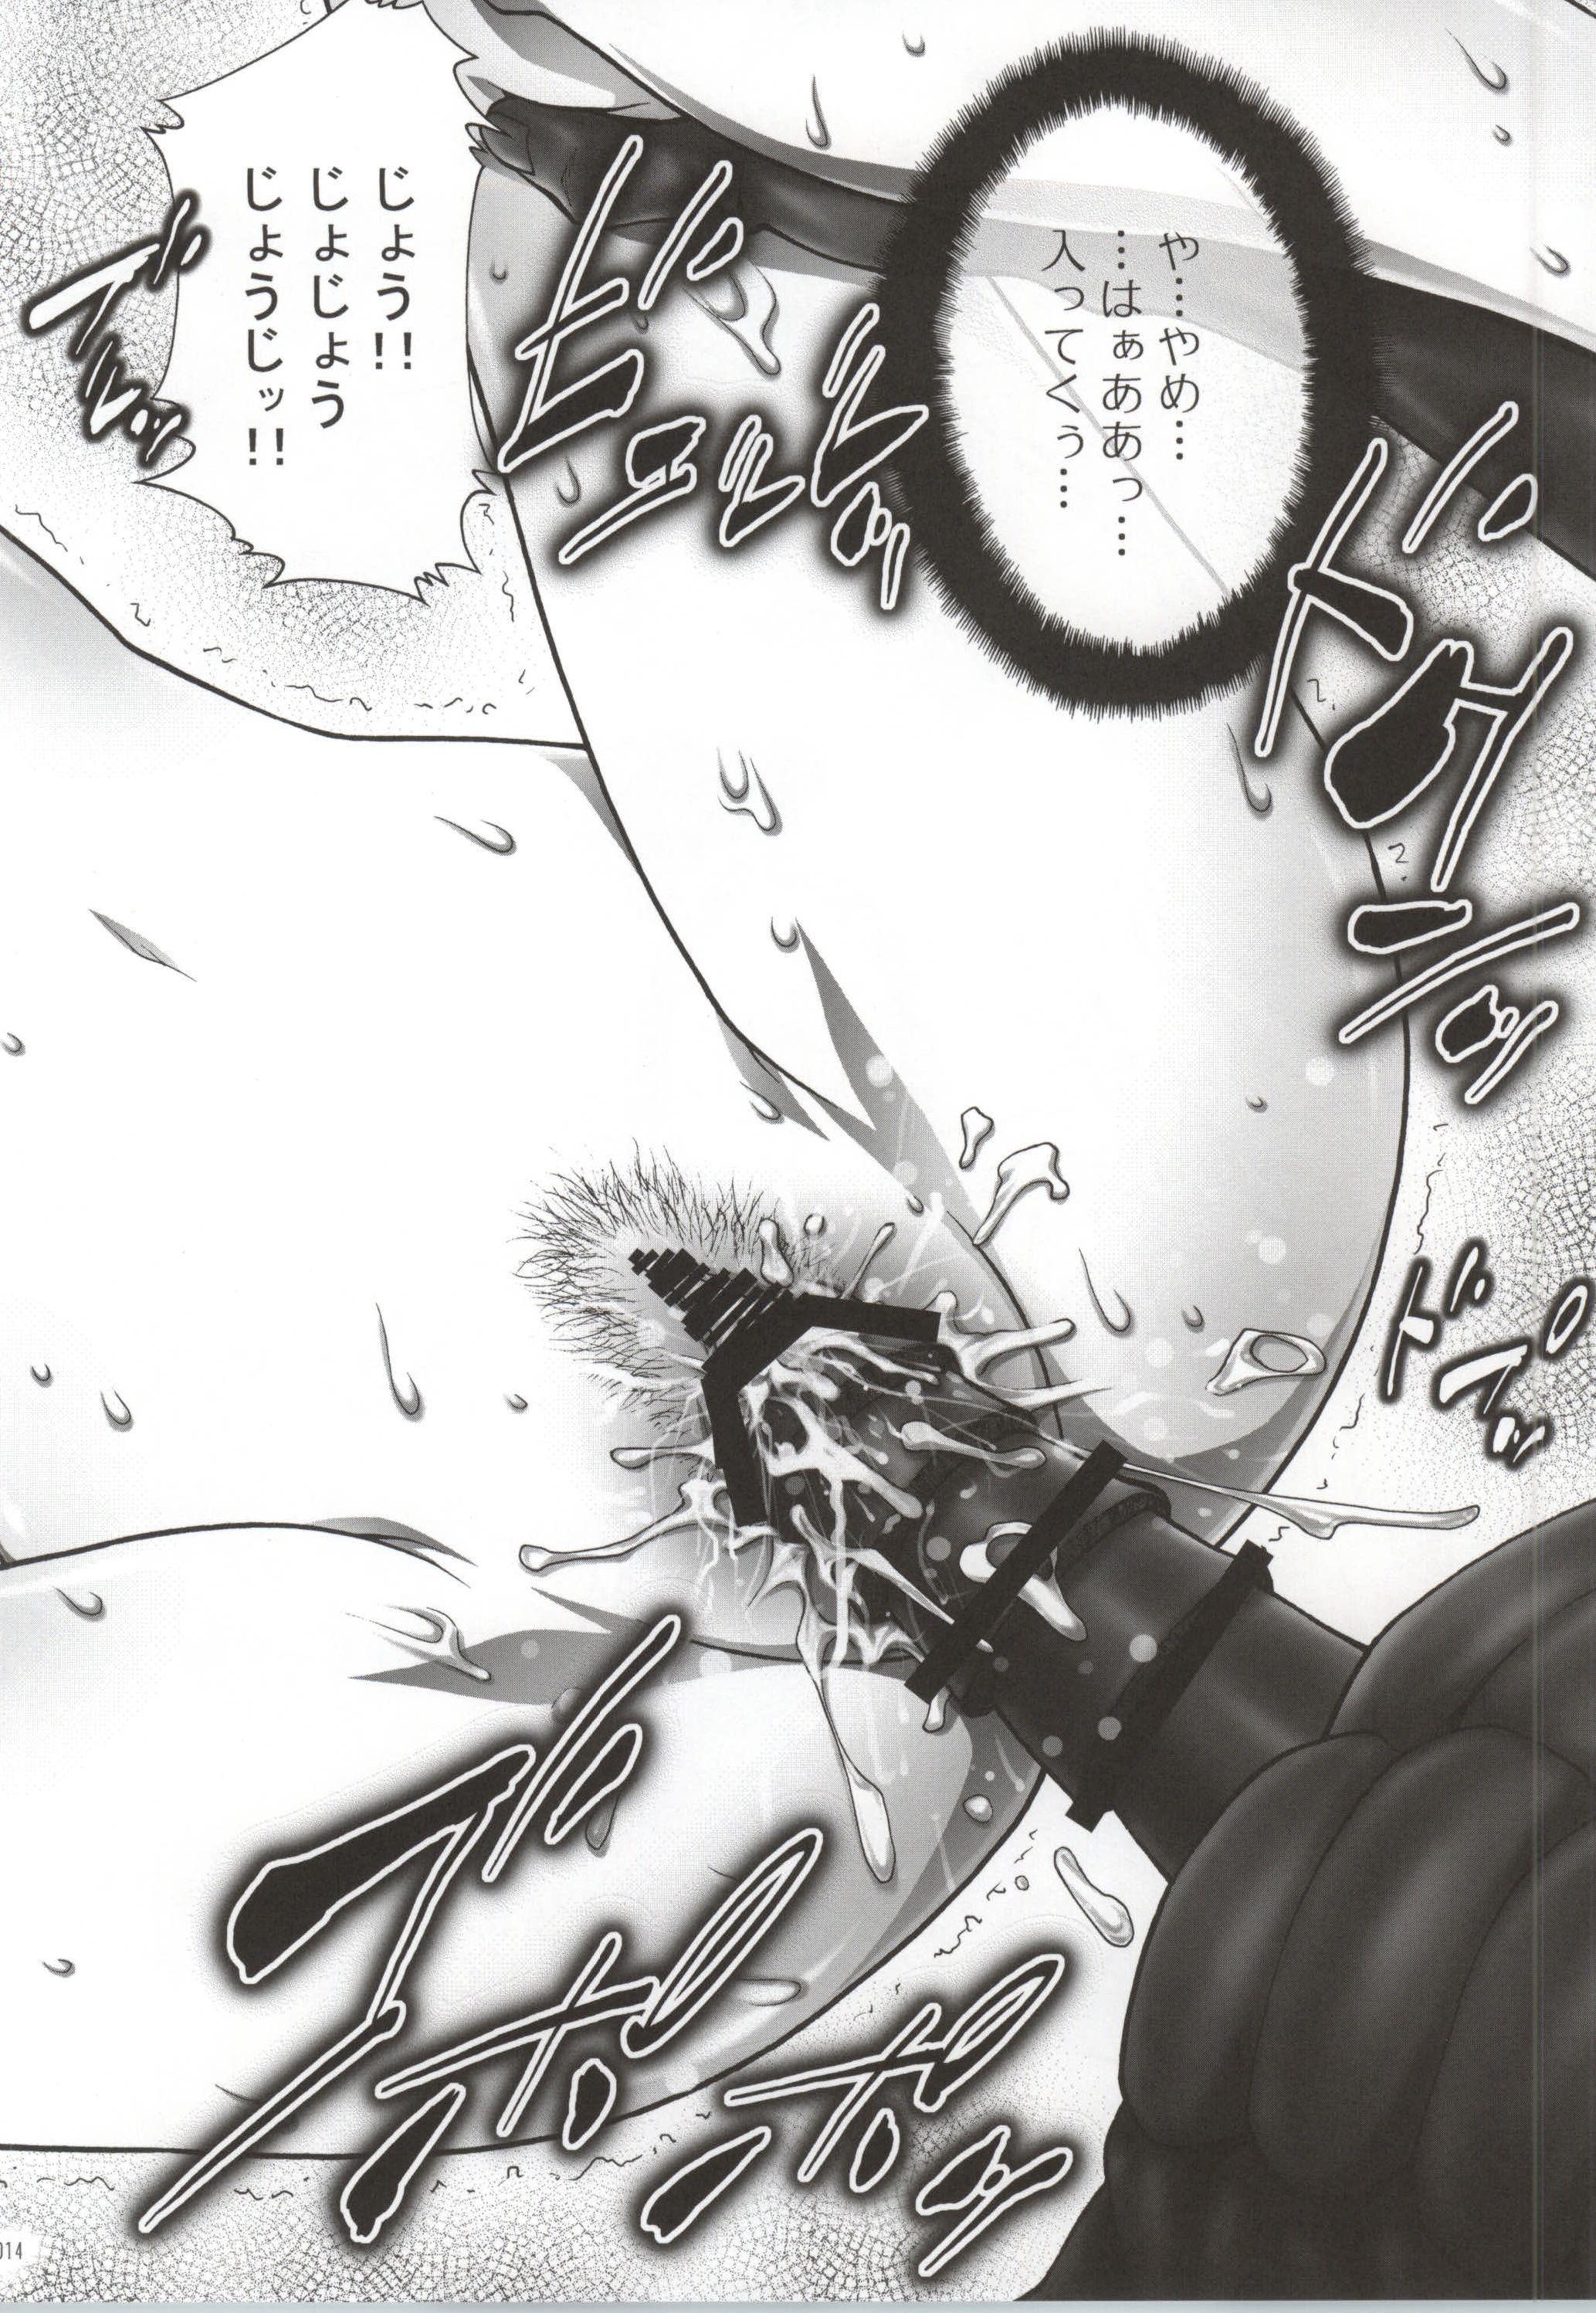 Hard Fucking BITCH FORMARS - Terra formars Oldvsyoung - Page 11